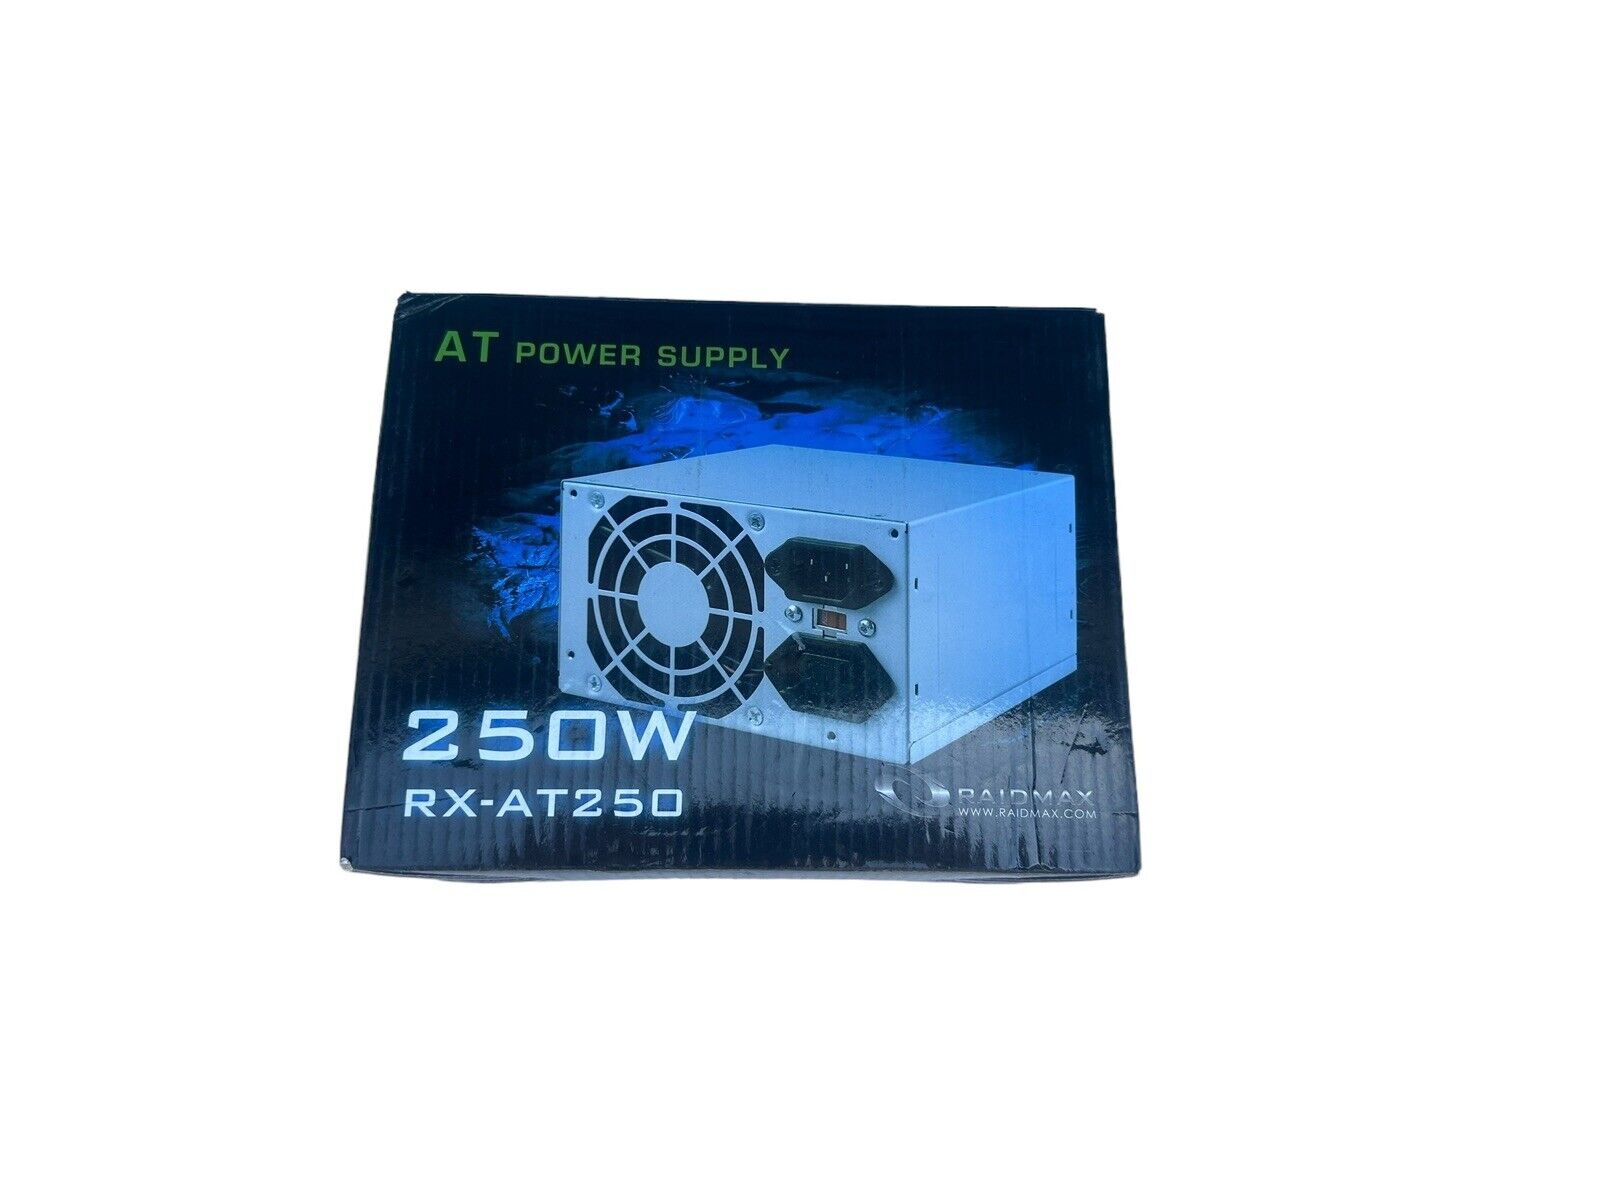 AT Power Supply 250W Power Supply RX-AT250 Power Supply Replacement PC Gaming